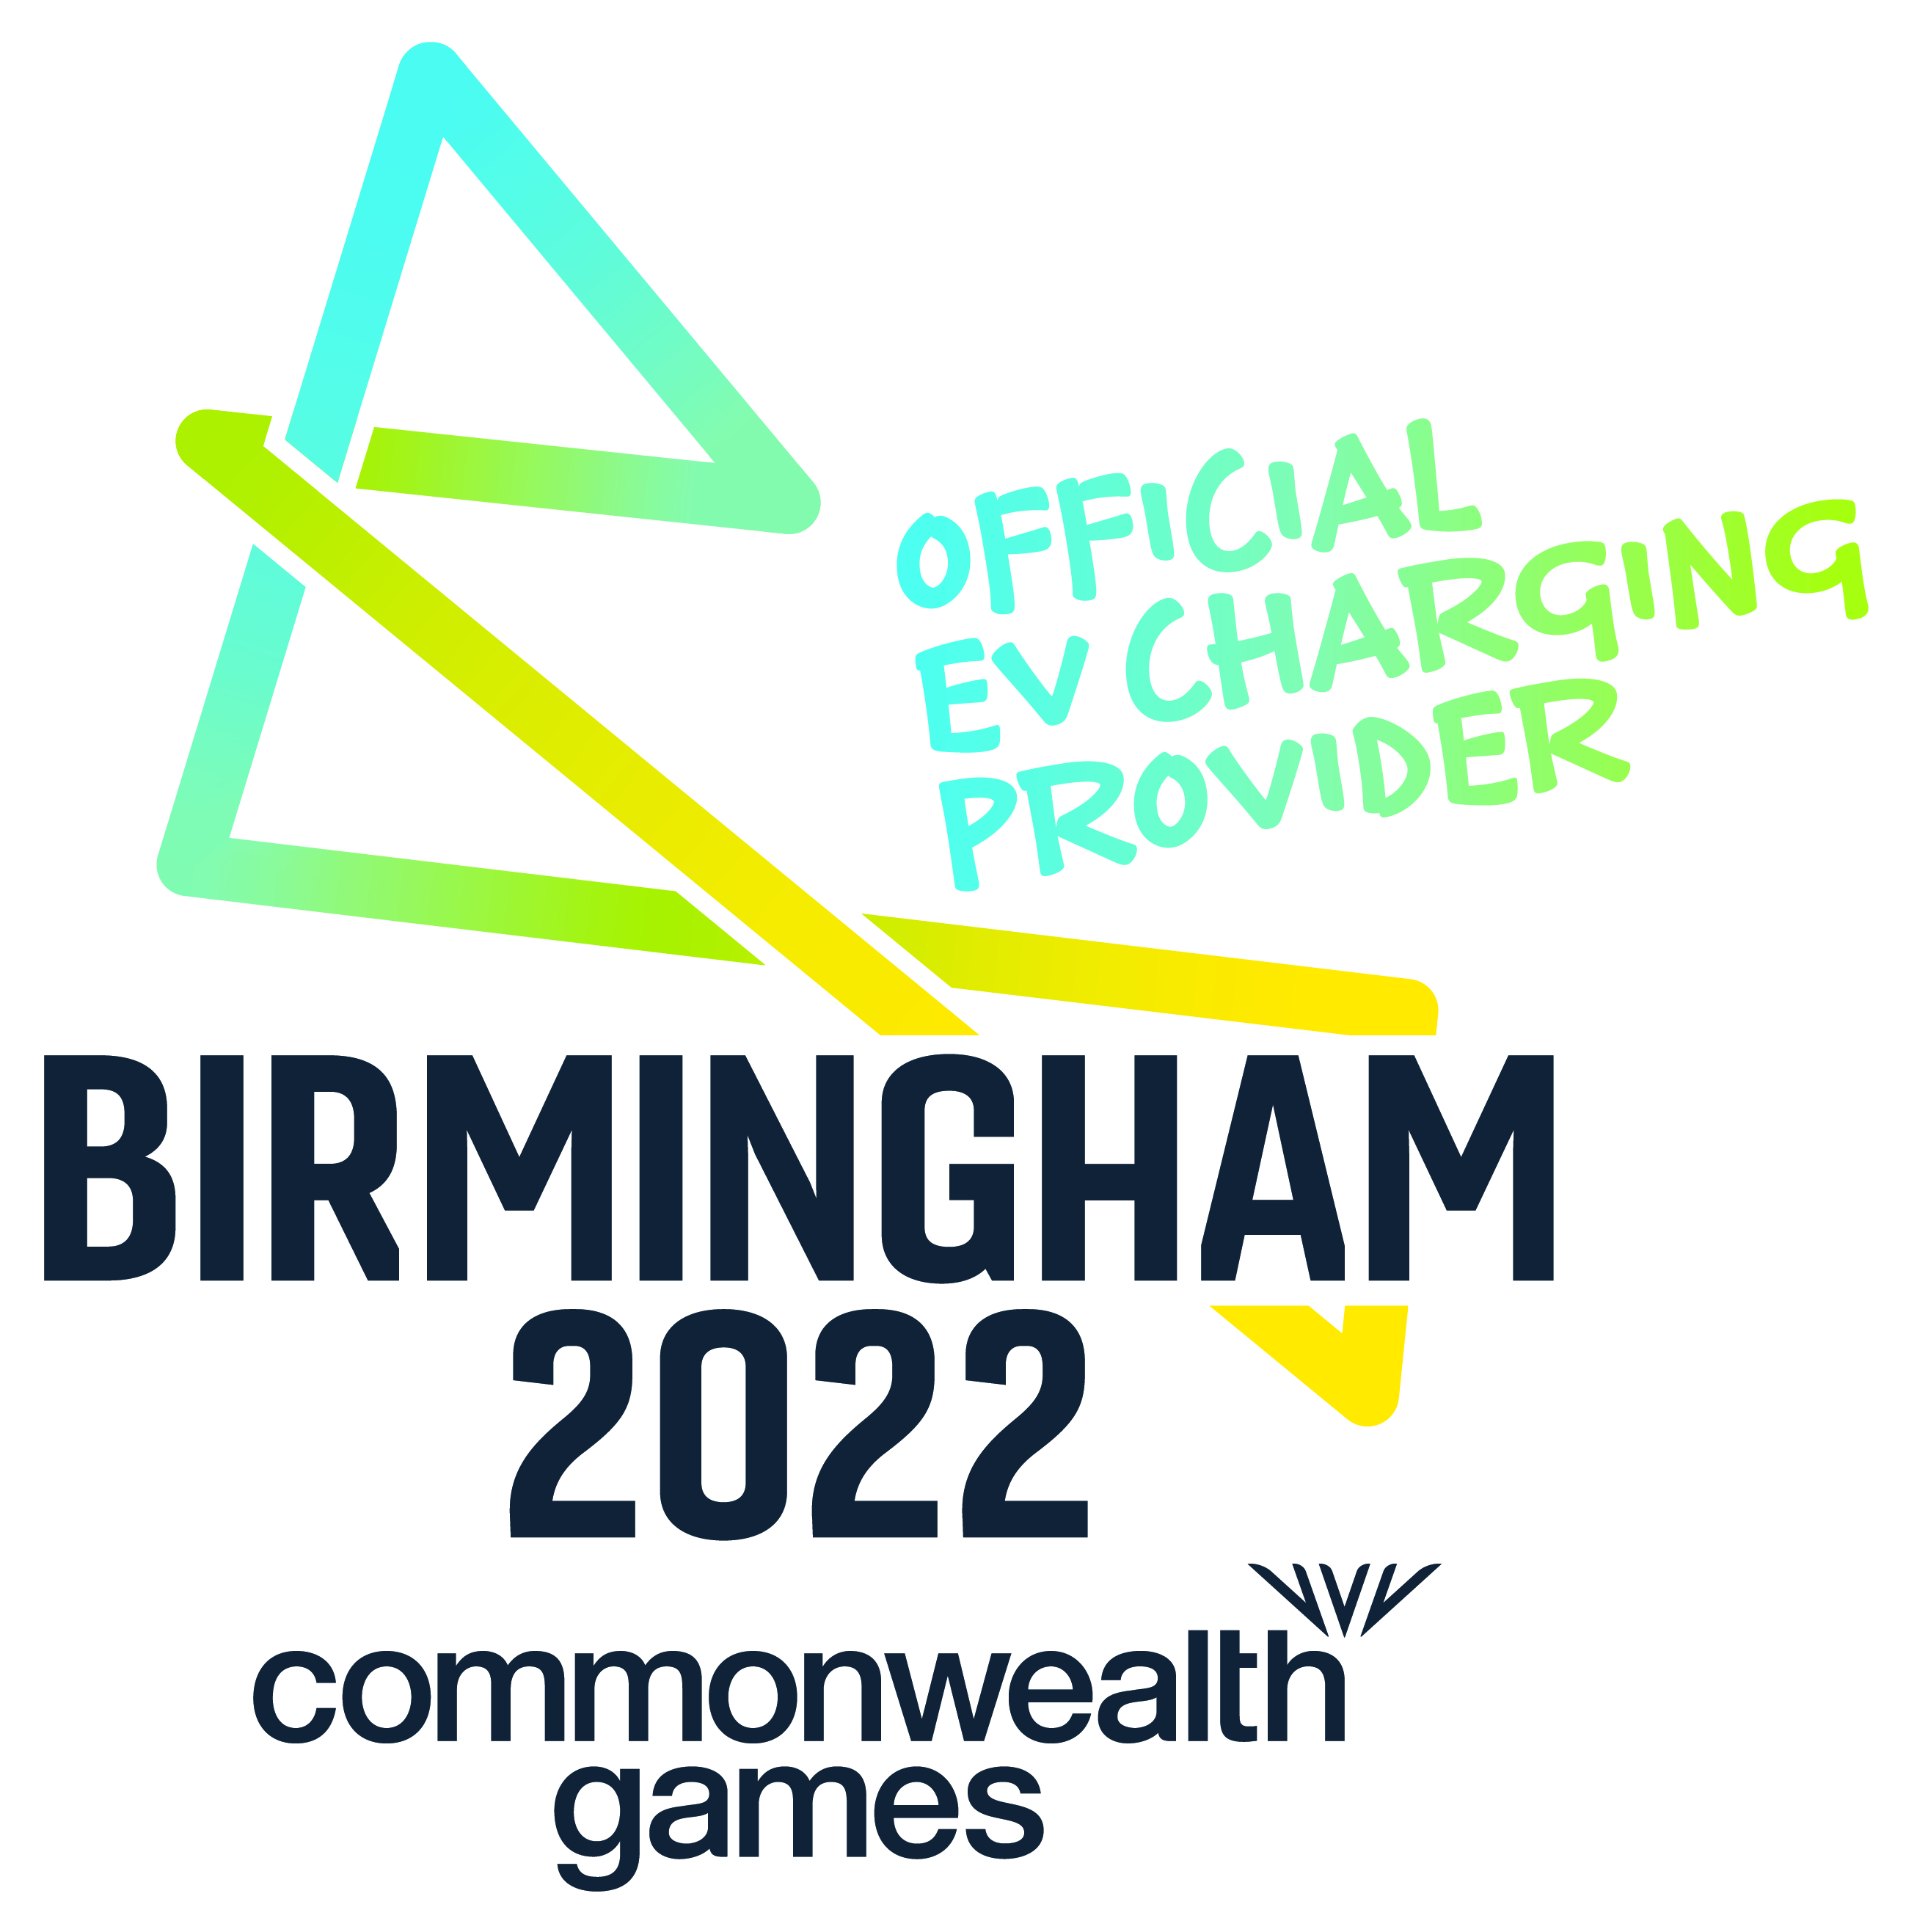 National Grid announced as the Birmingham 2022 Commonwealth Games